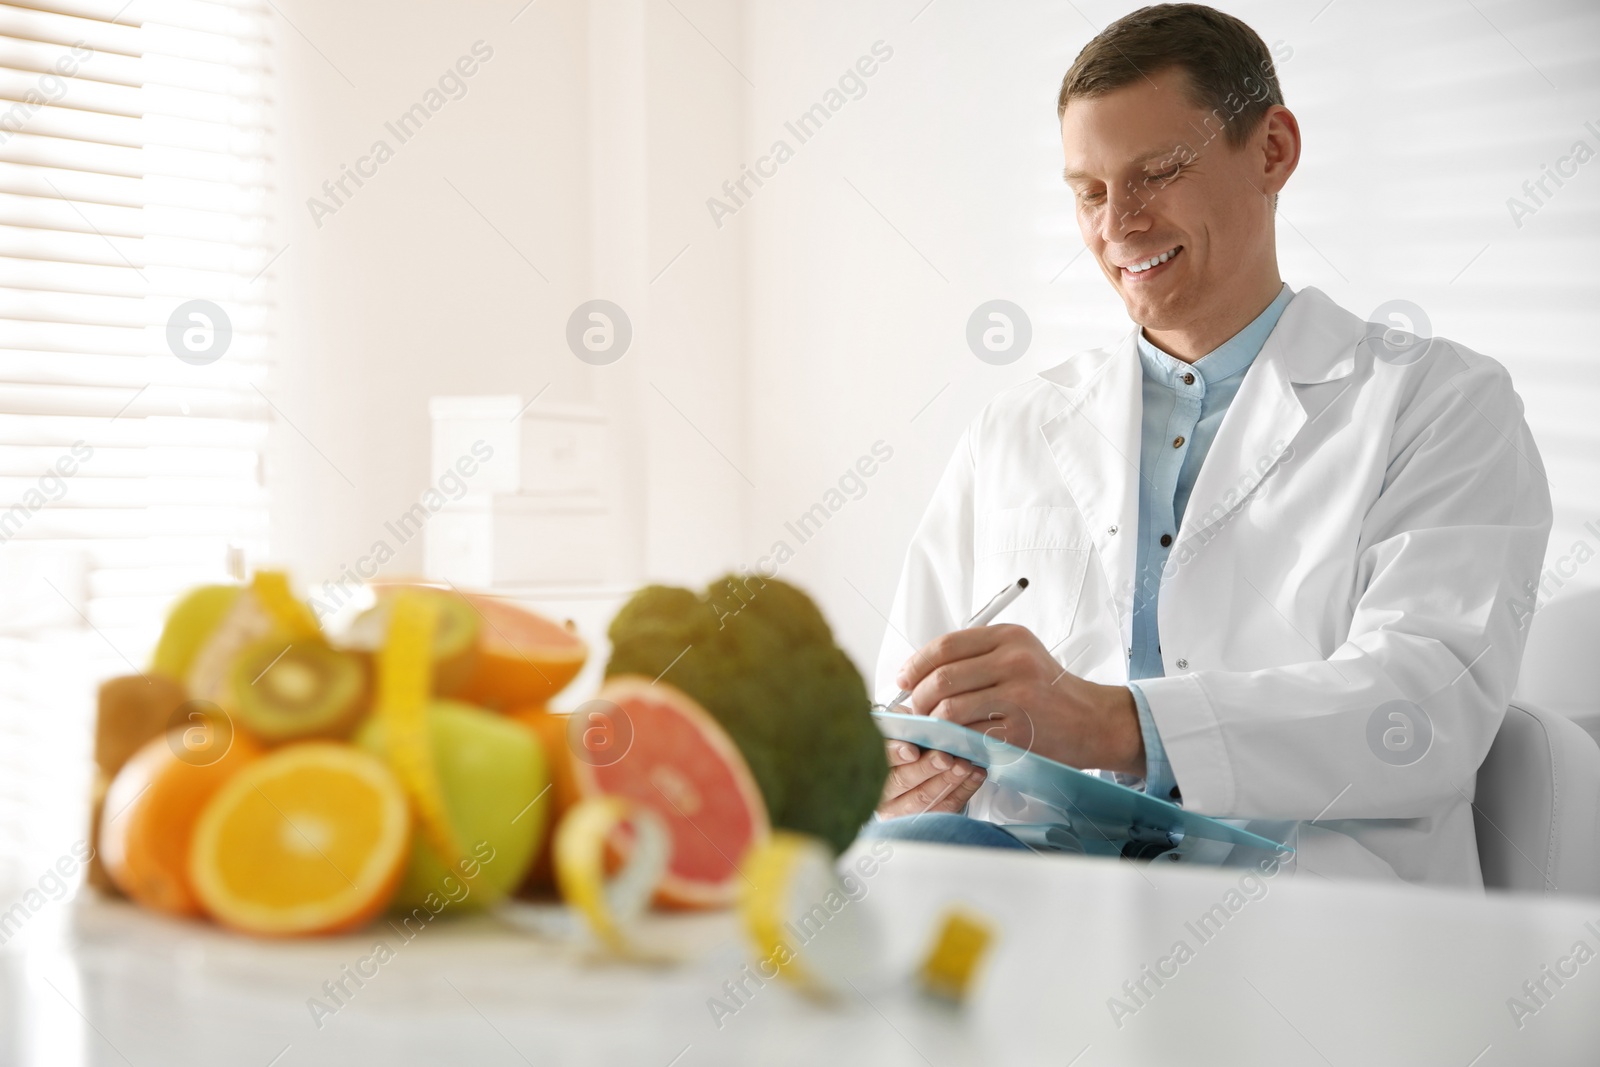 Image of Nutritionist working at desk in his office